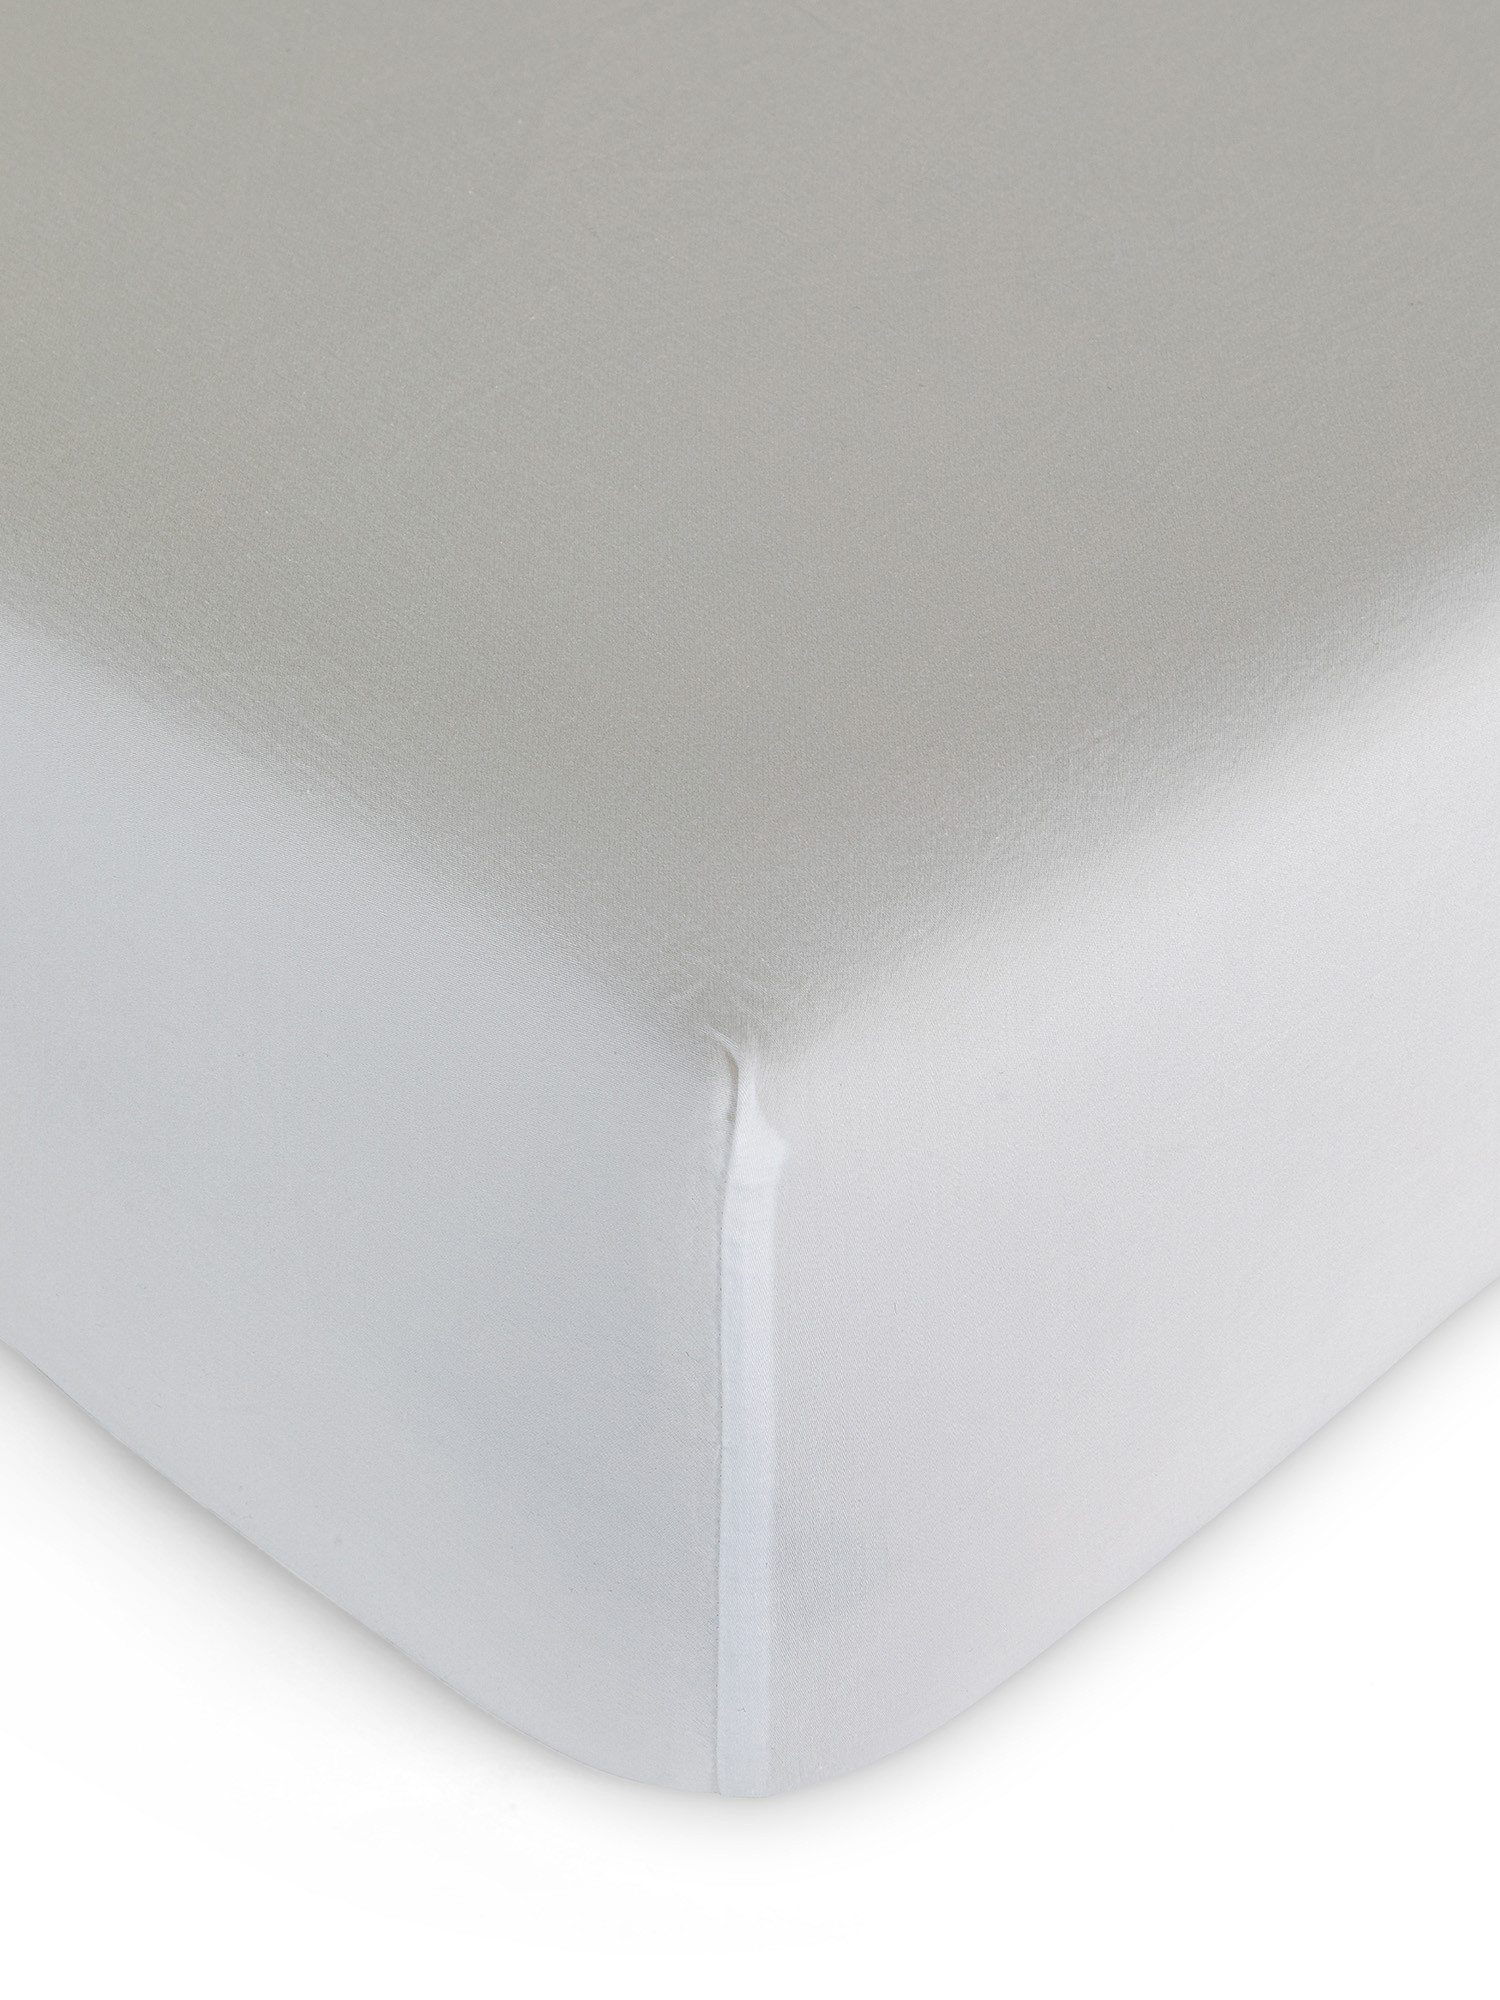 Zefiro solid color cotton satin fitted sheet, White, large image number 0